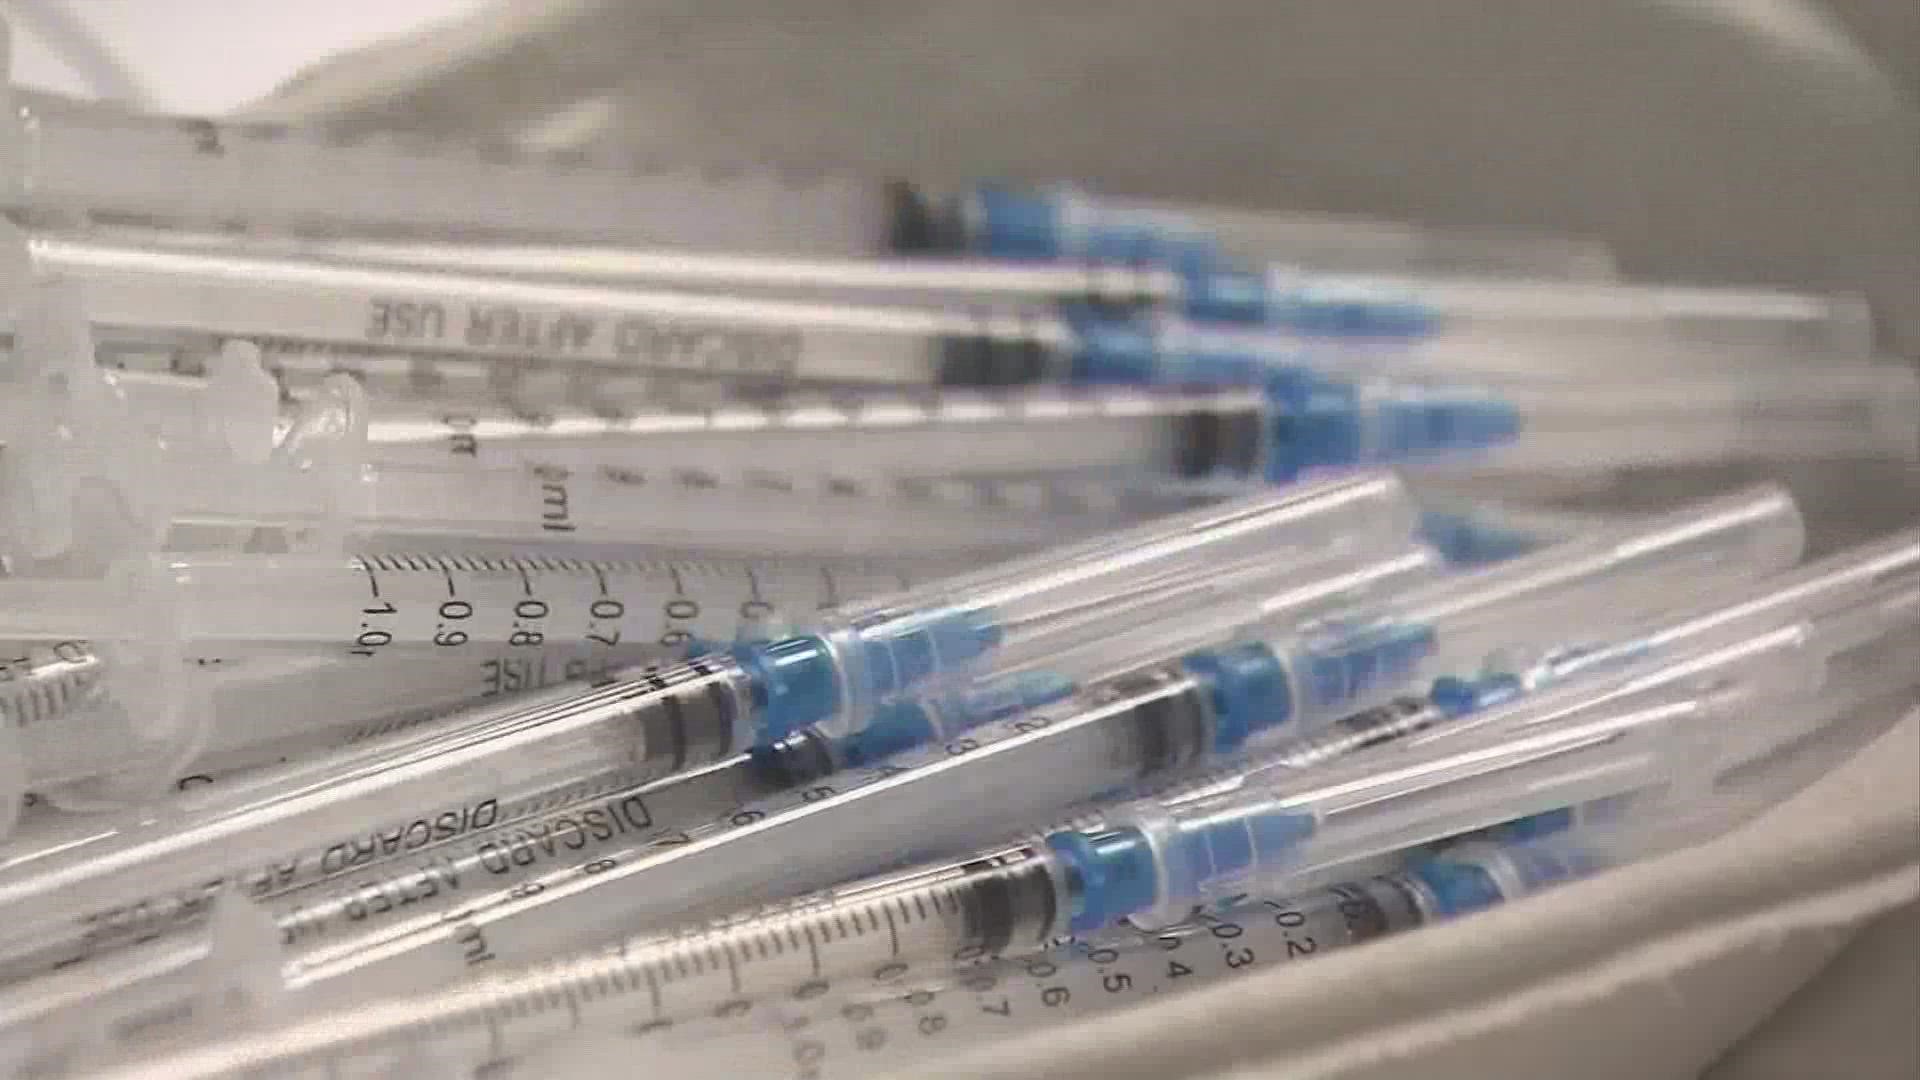 The two cases were detected in two adult men in central Ohio, according to the Ohio Department of Health.